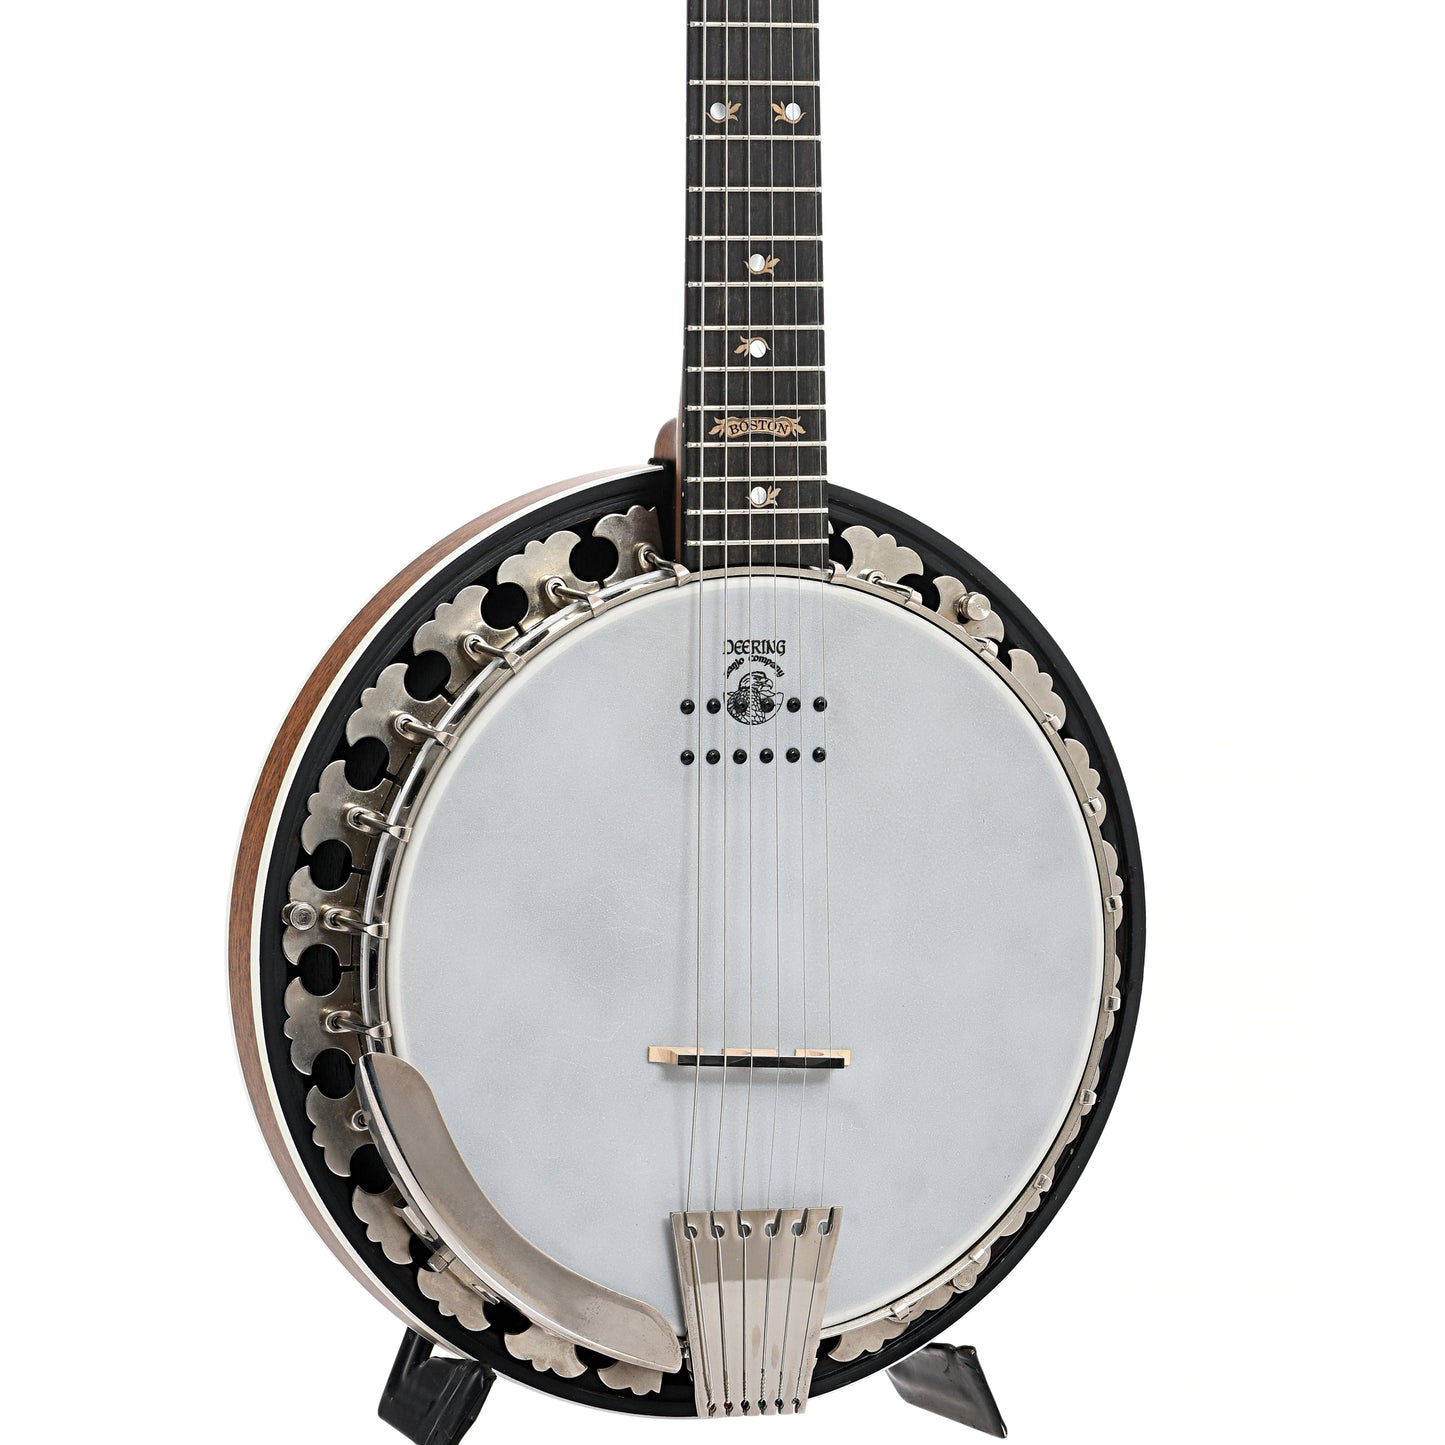 Front and side of Deering Boston 6 A/E Banjo-Guitar (2012)